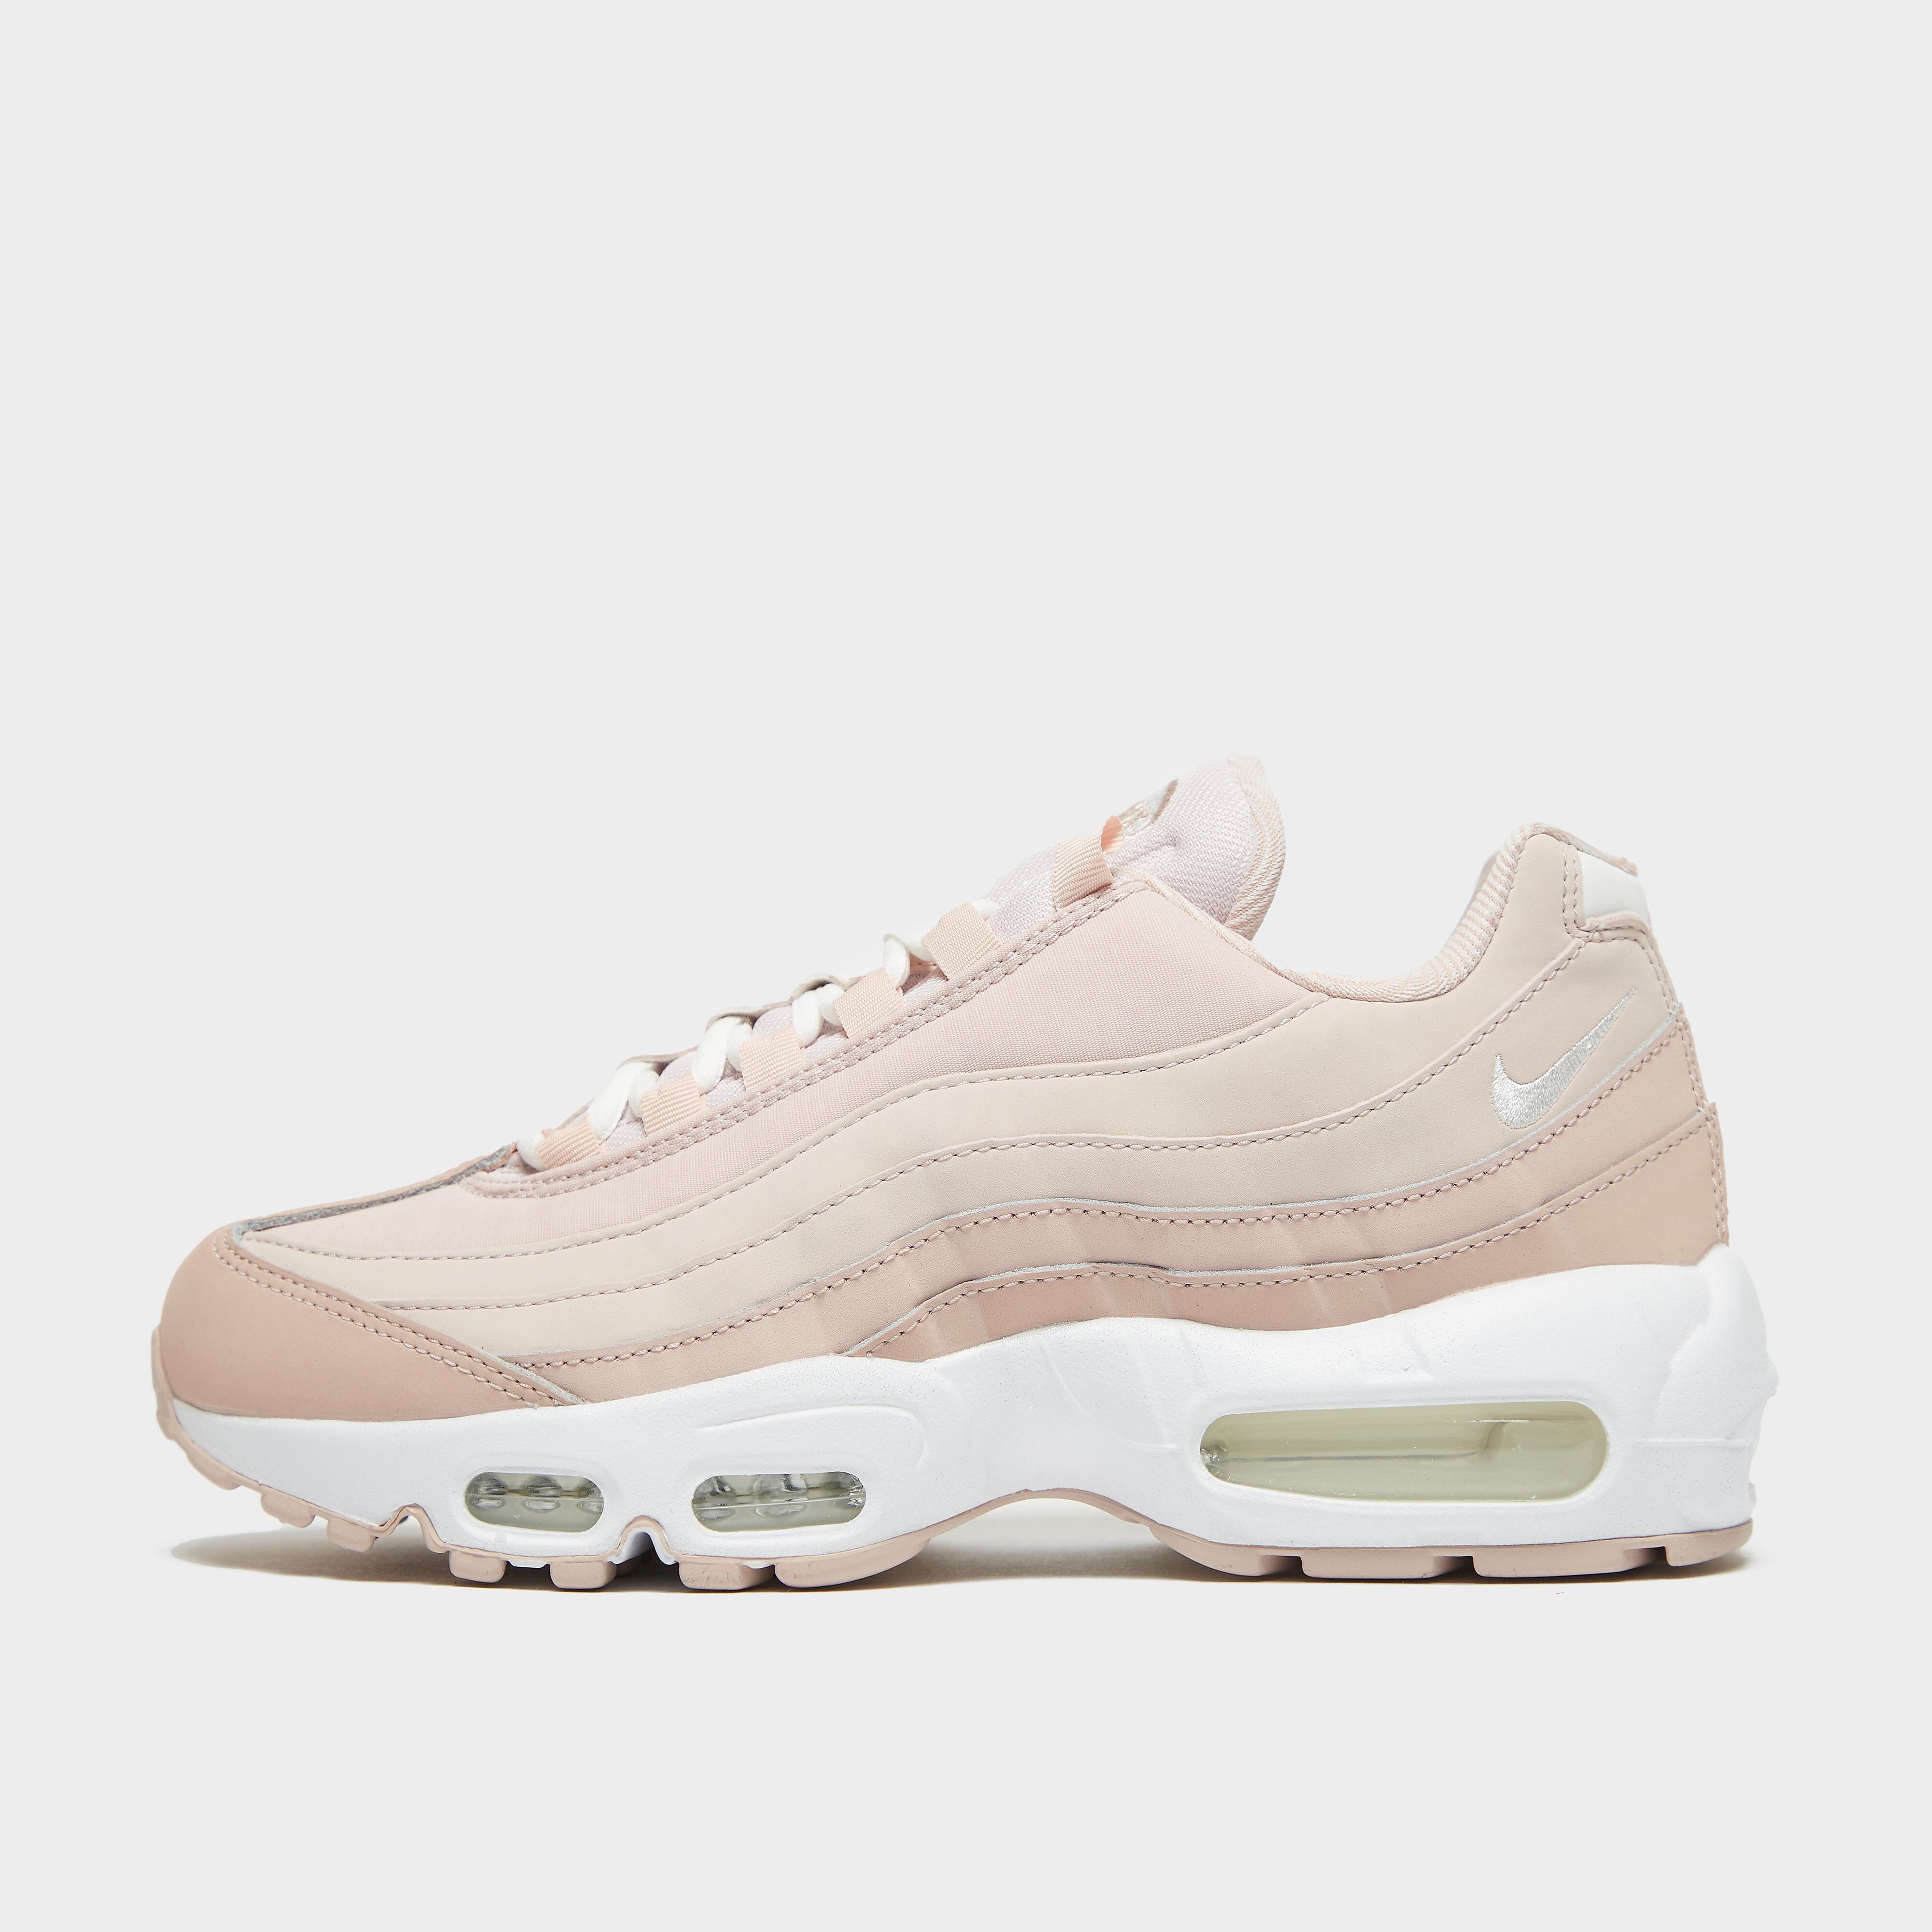 Nike Air Max 95 Women's - Pink - Womens  size: 7